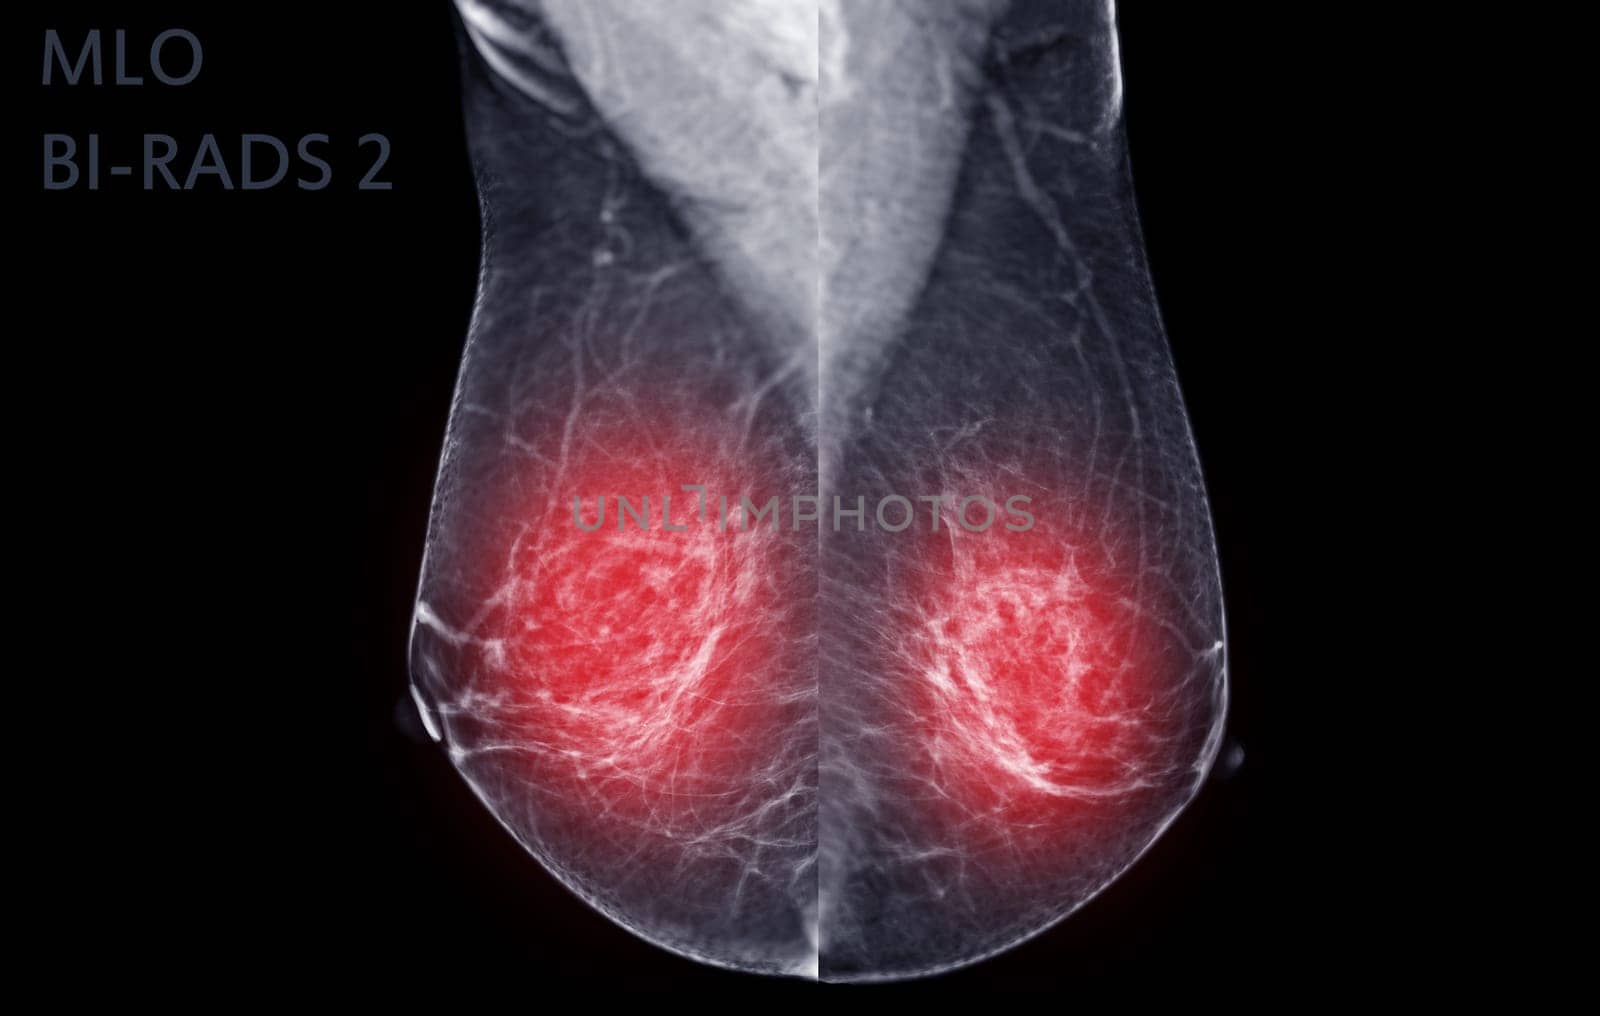 X-ray Digital Mammogram of Right  side  MLO view . mammography or breast scan for Breast cancer  showing BI-RADS CATEGORY 2  Benign tumor.